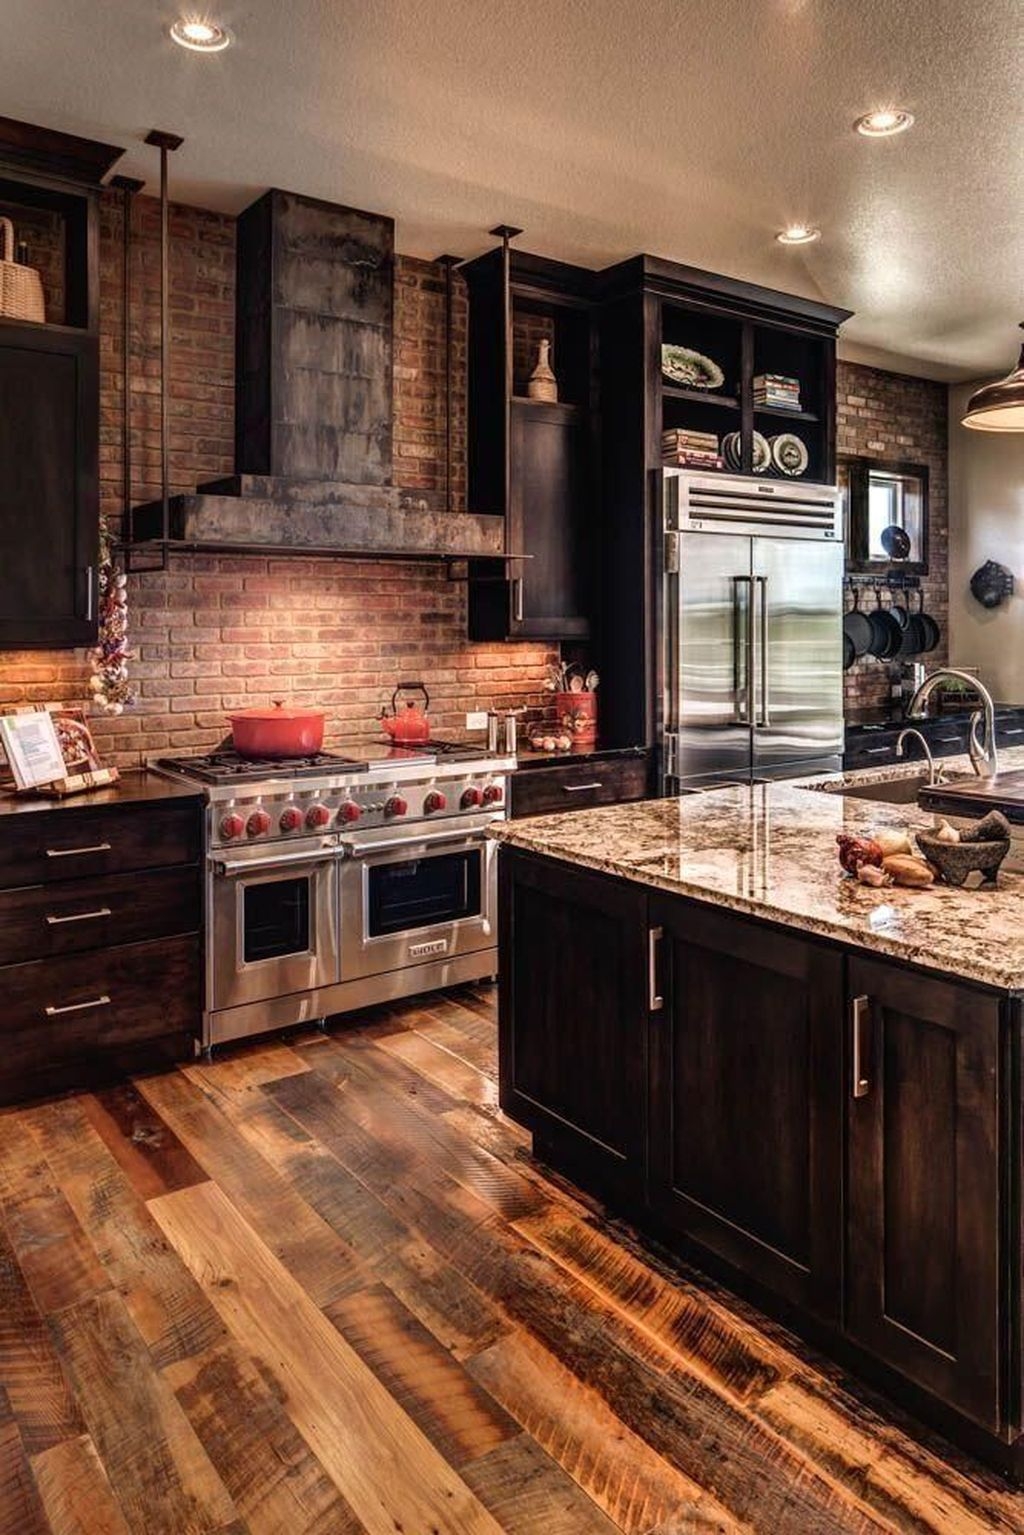 Warm Cozy Rustic Kitchen Designs For Your Cabin Besthomish